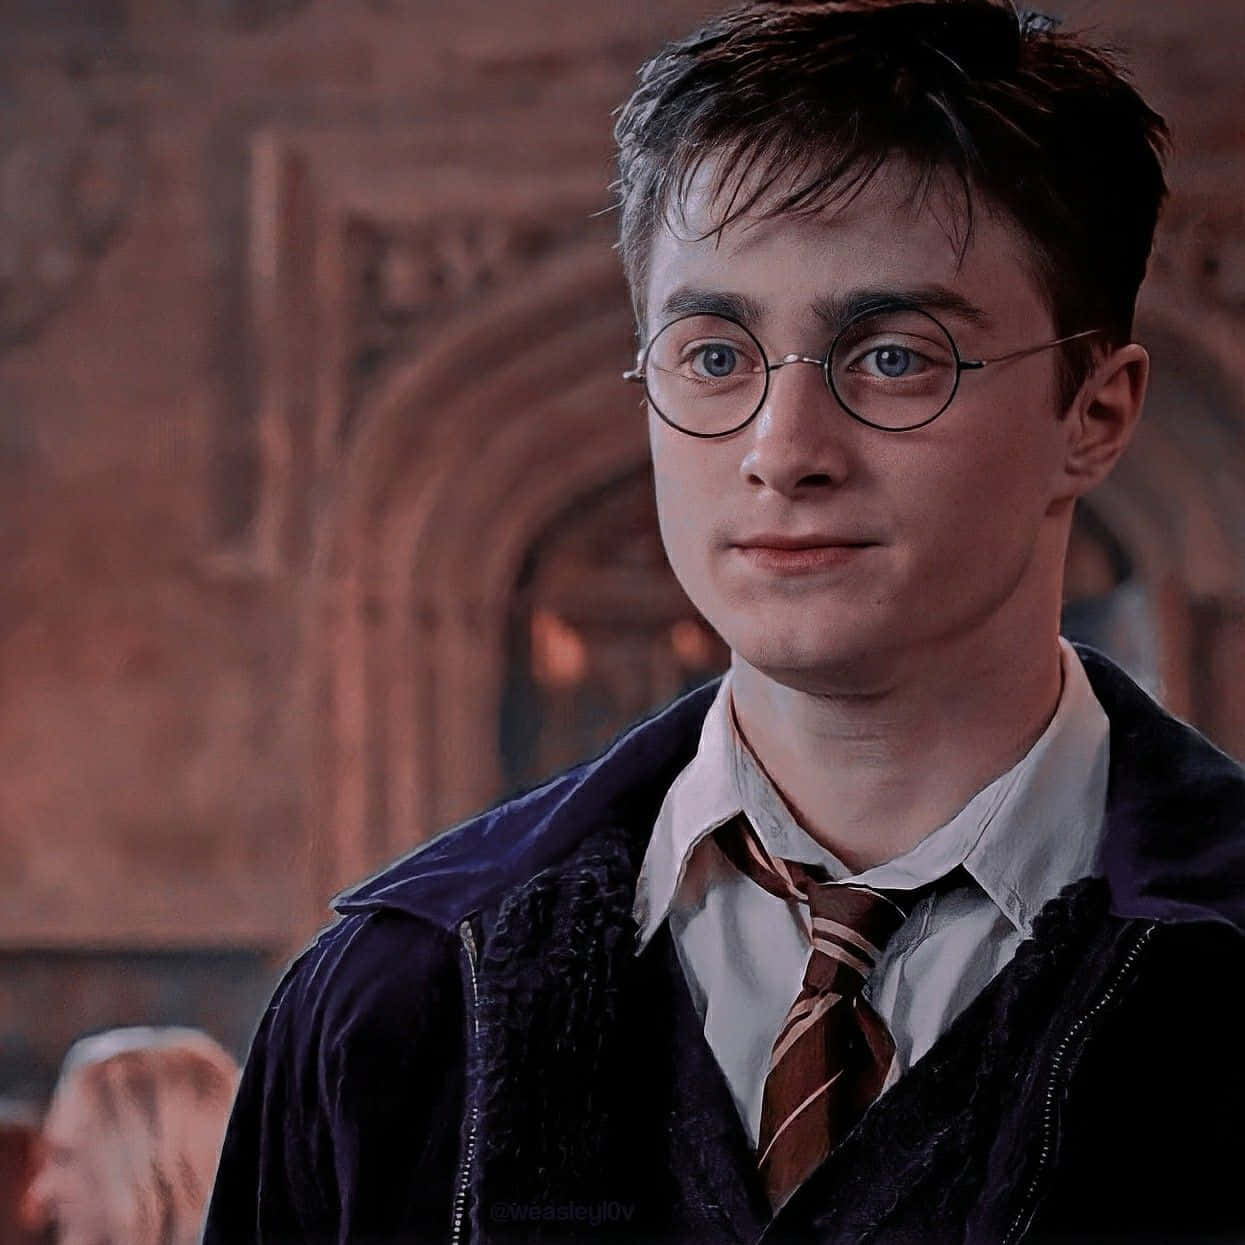 "The spirit of adventure lives on through Harry Potter."